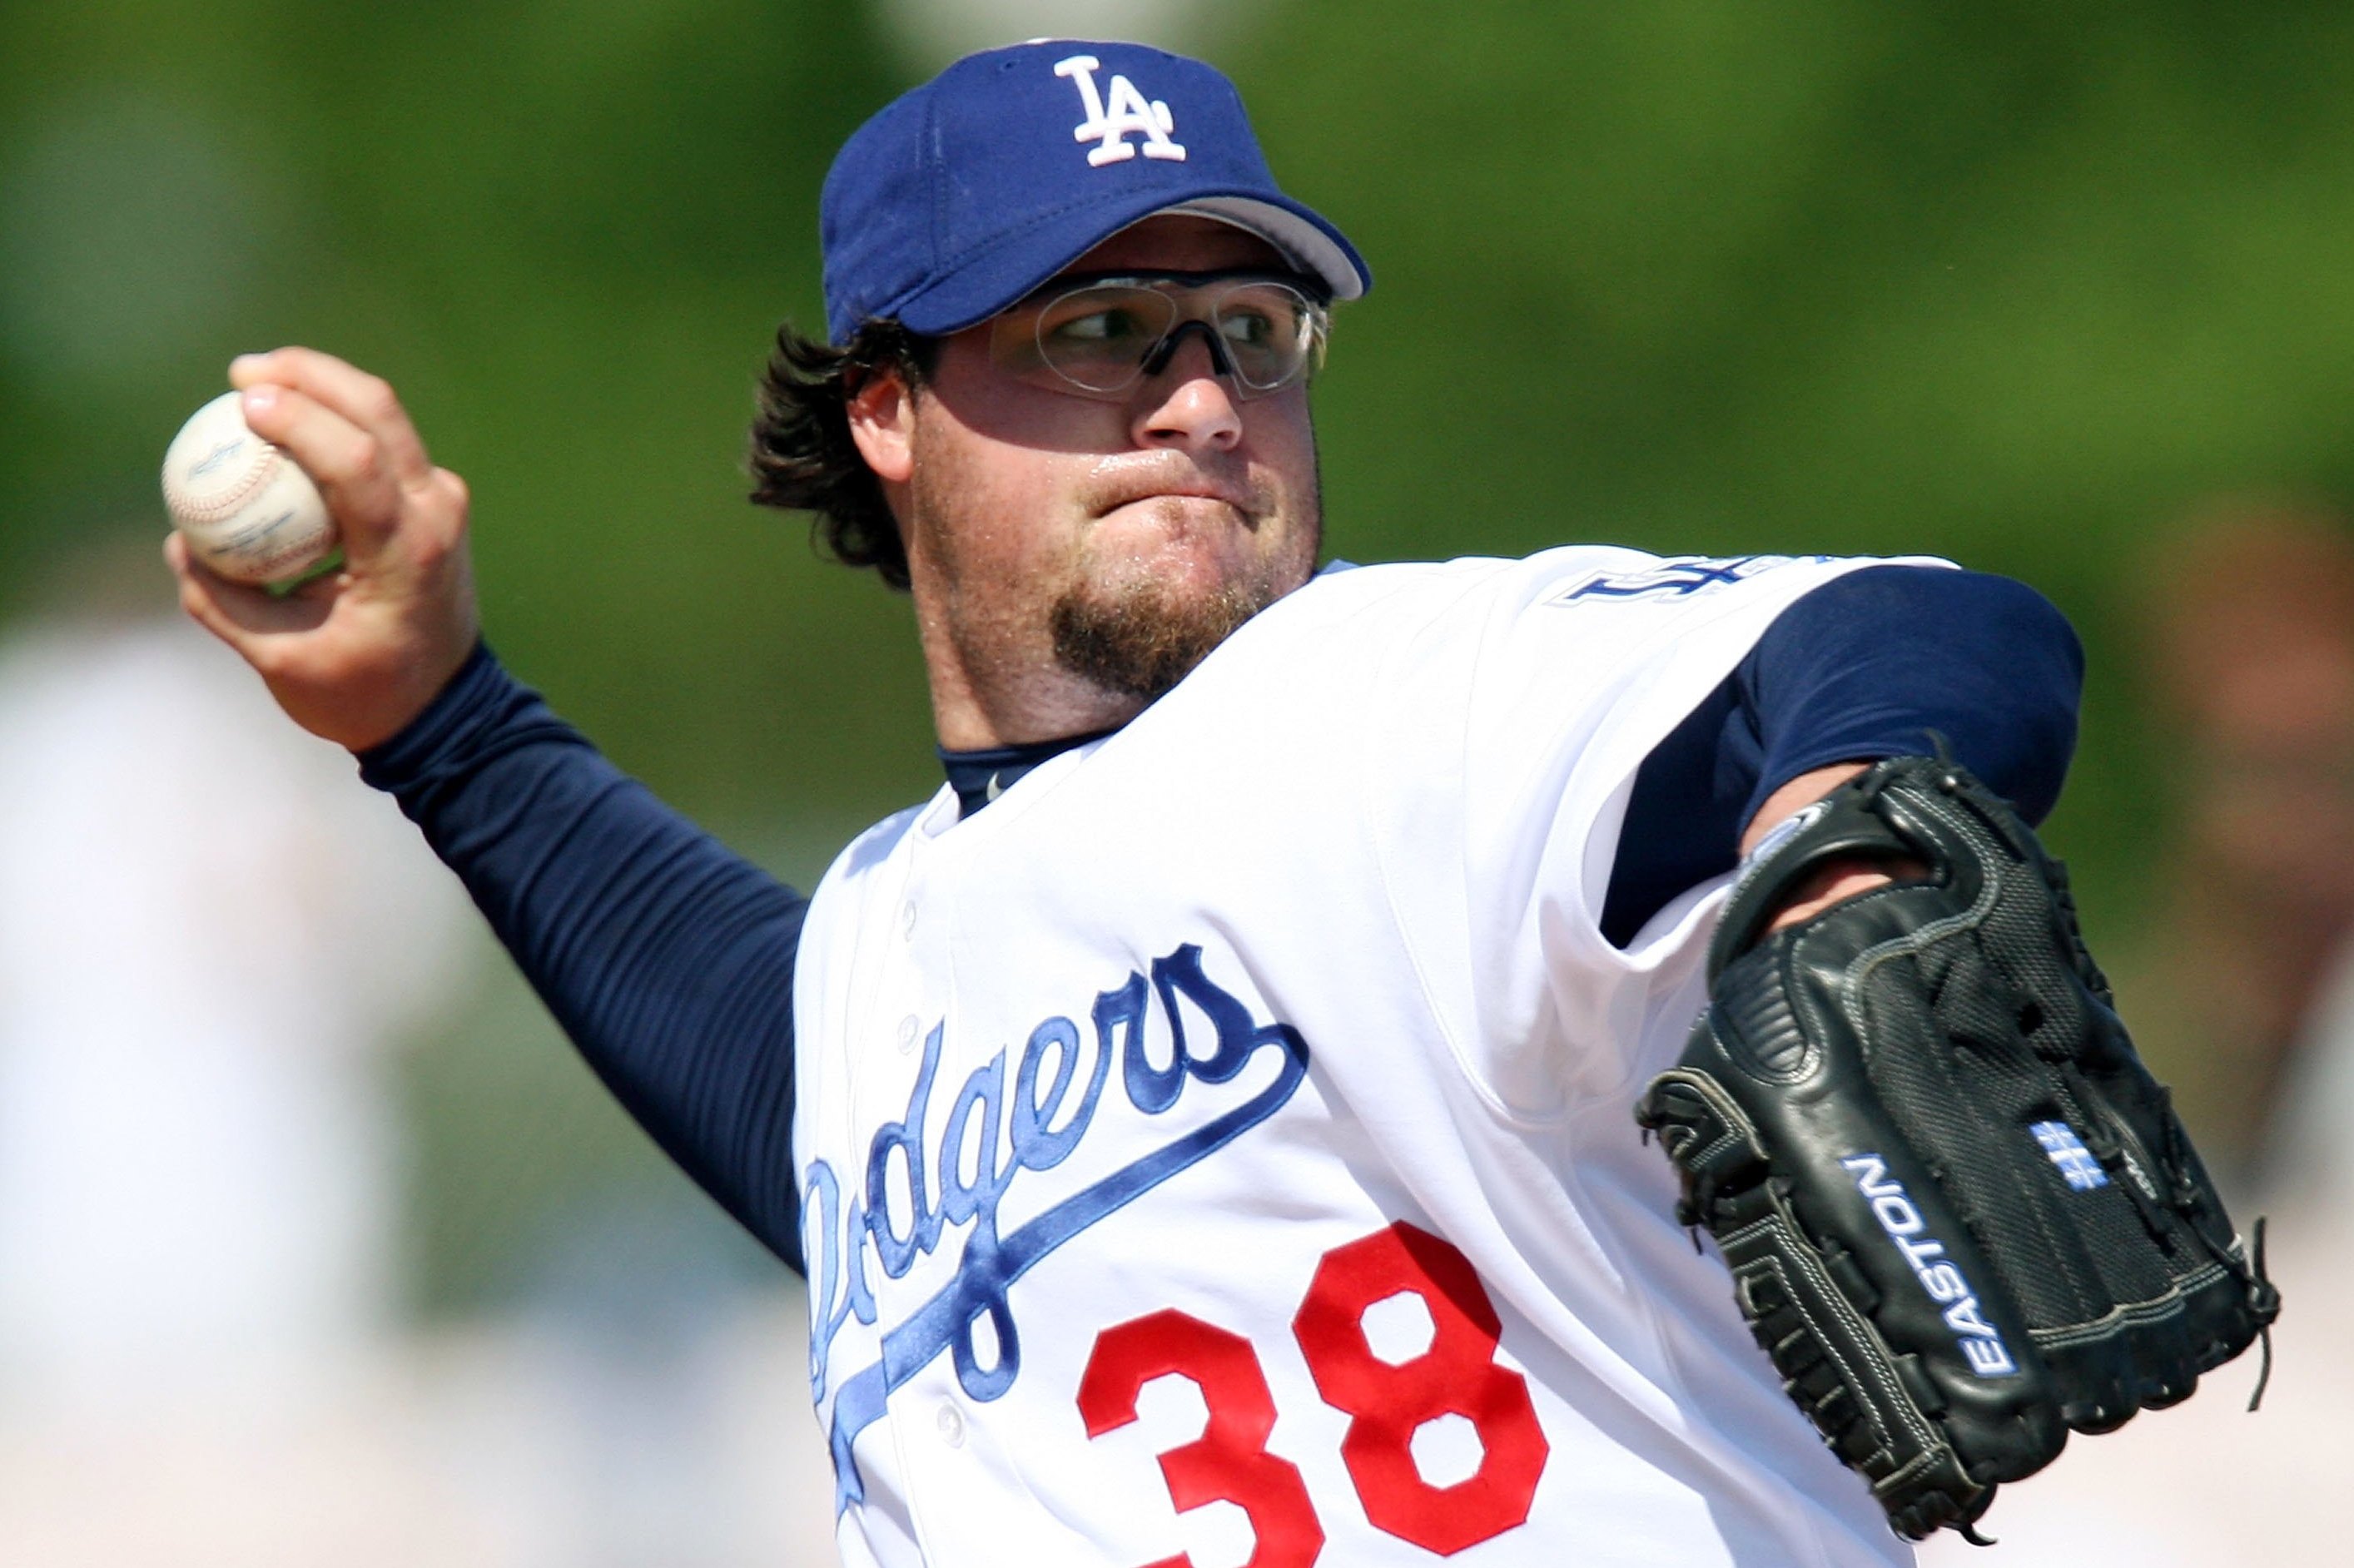 Canada's Gagne admits HGH use with Dodgers